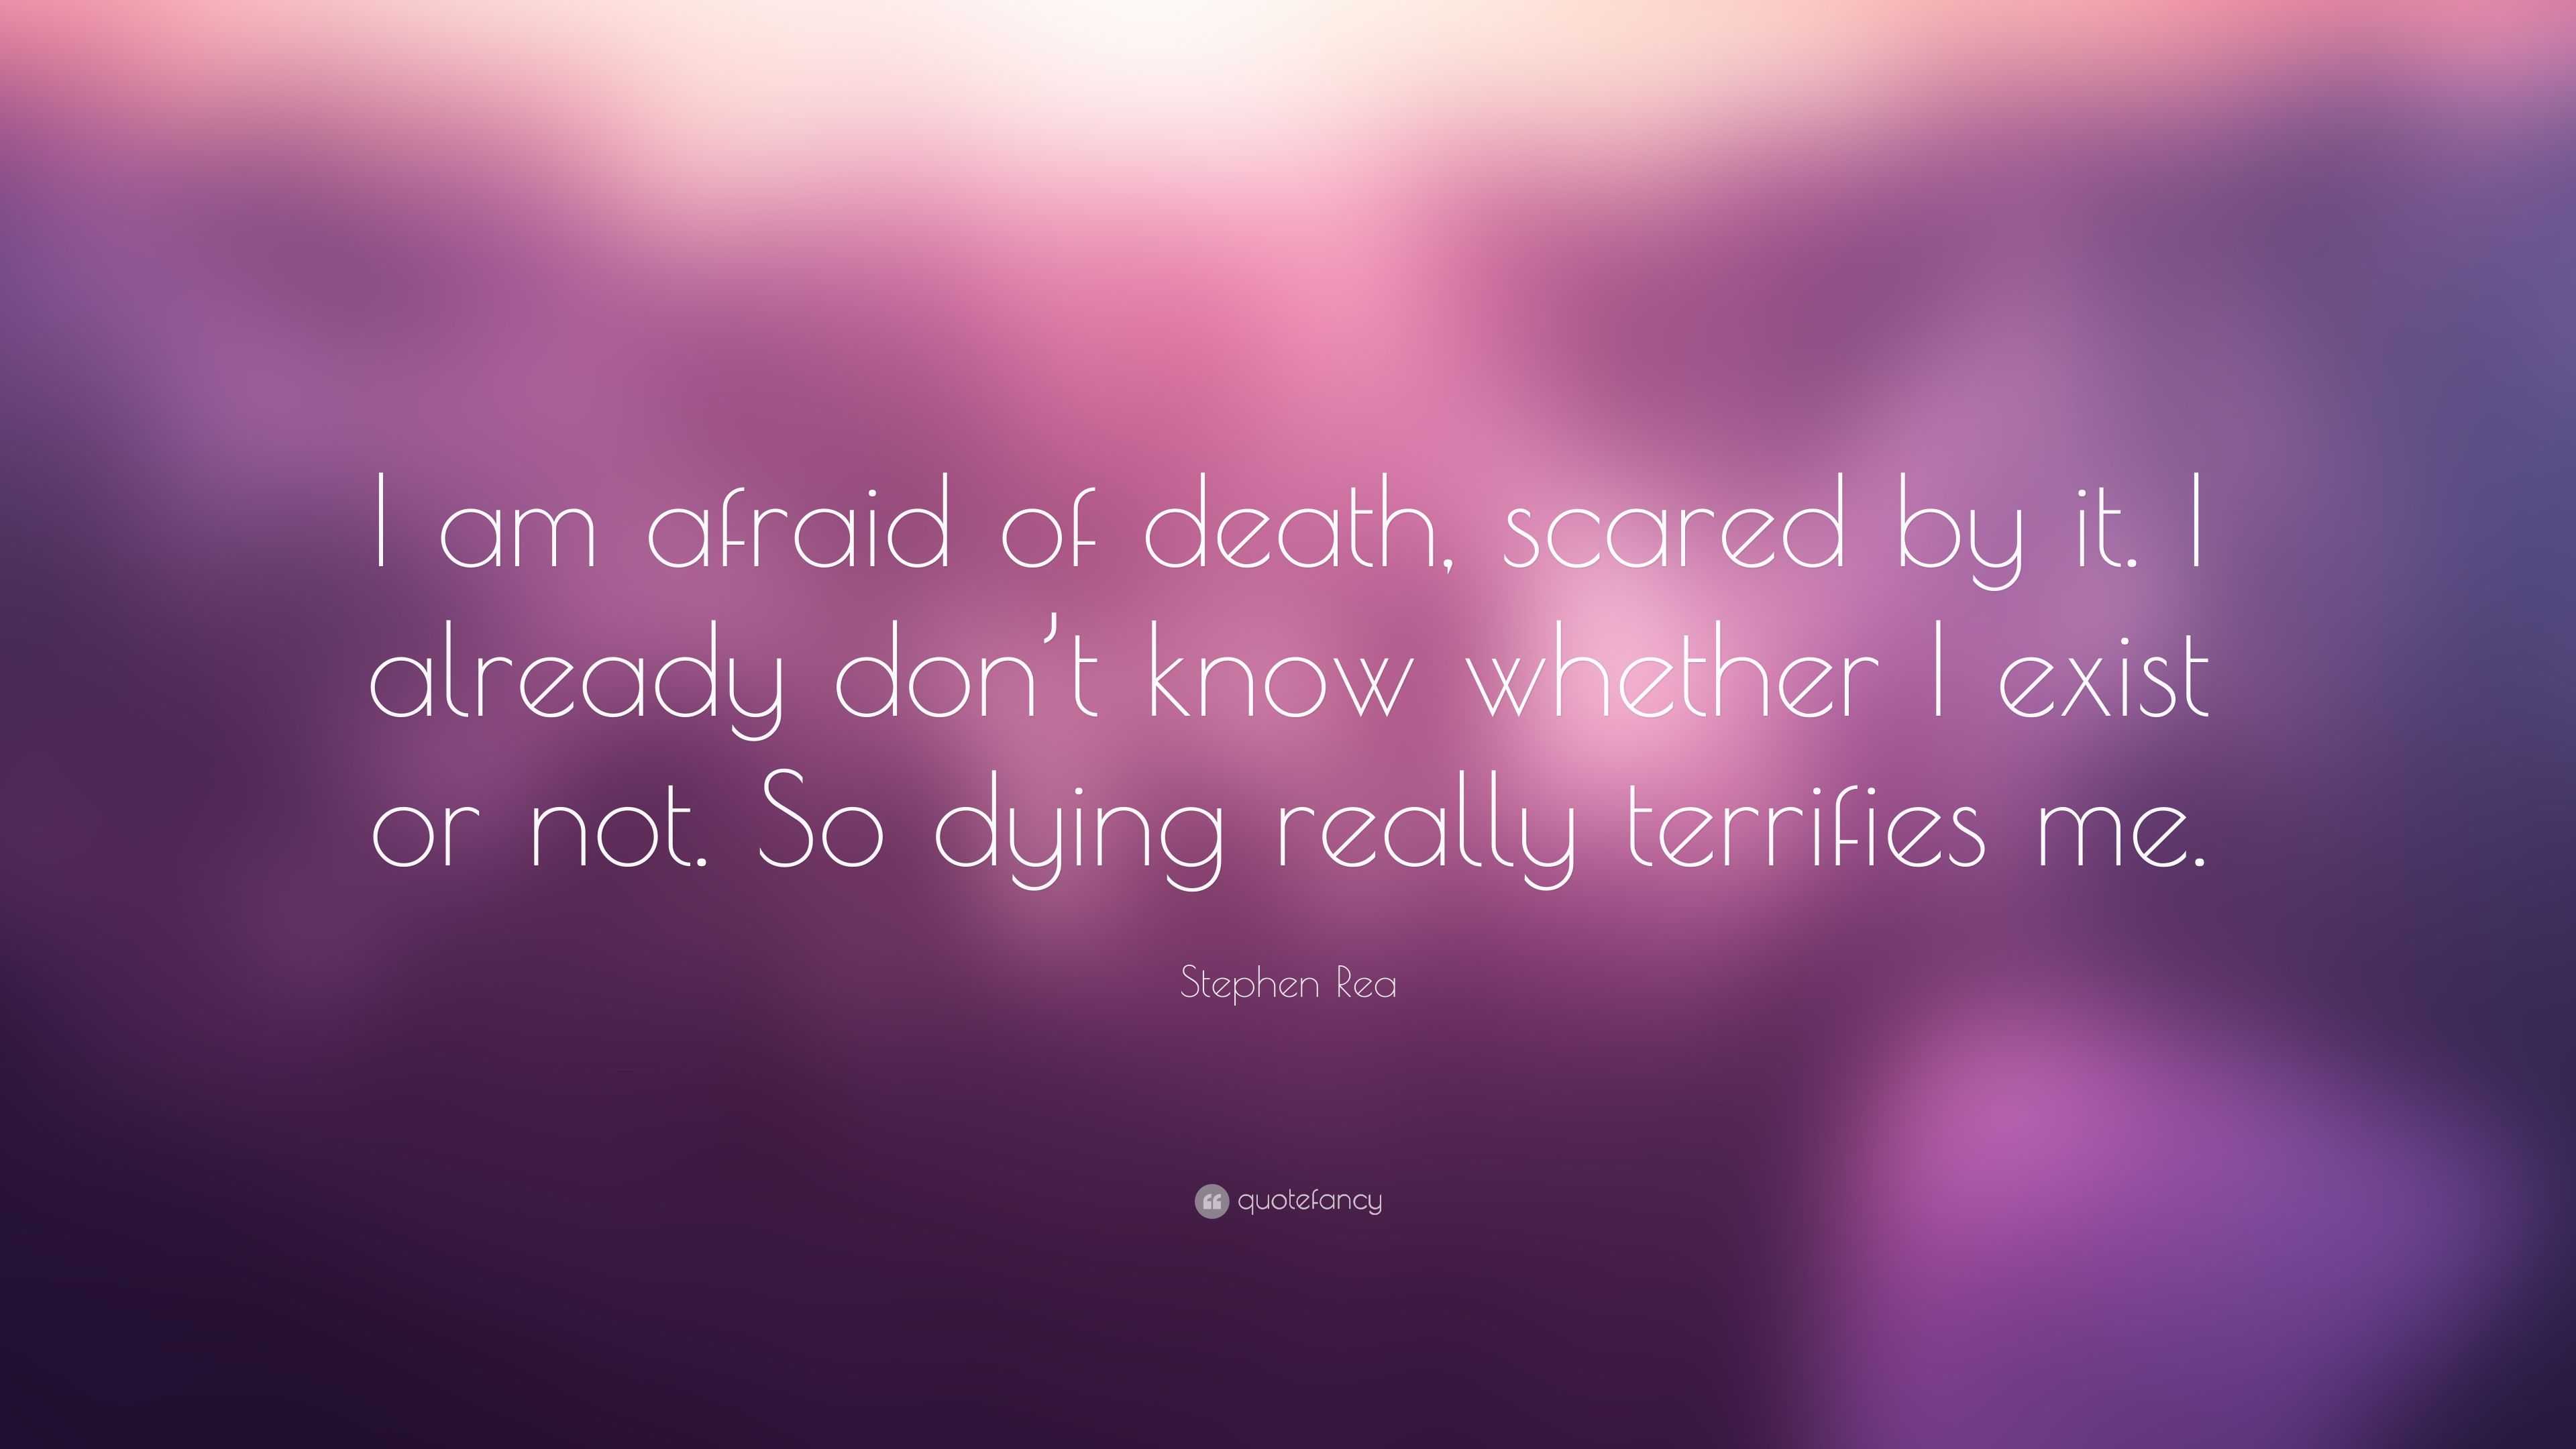 Can you really be scared to death?